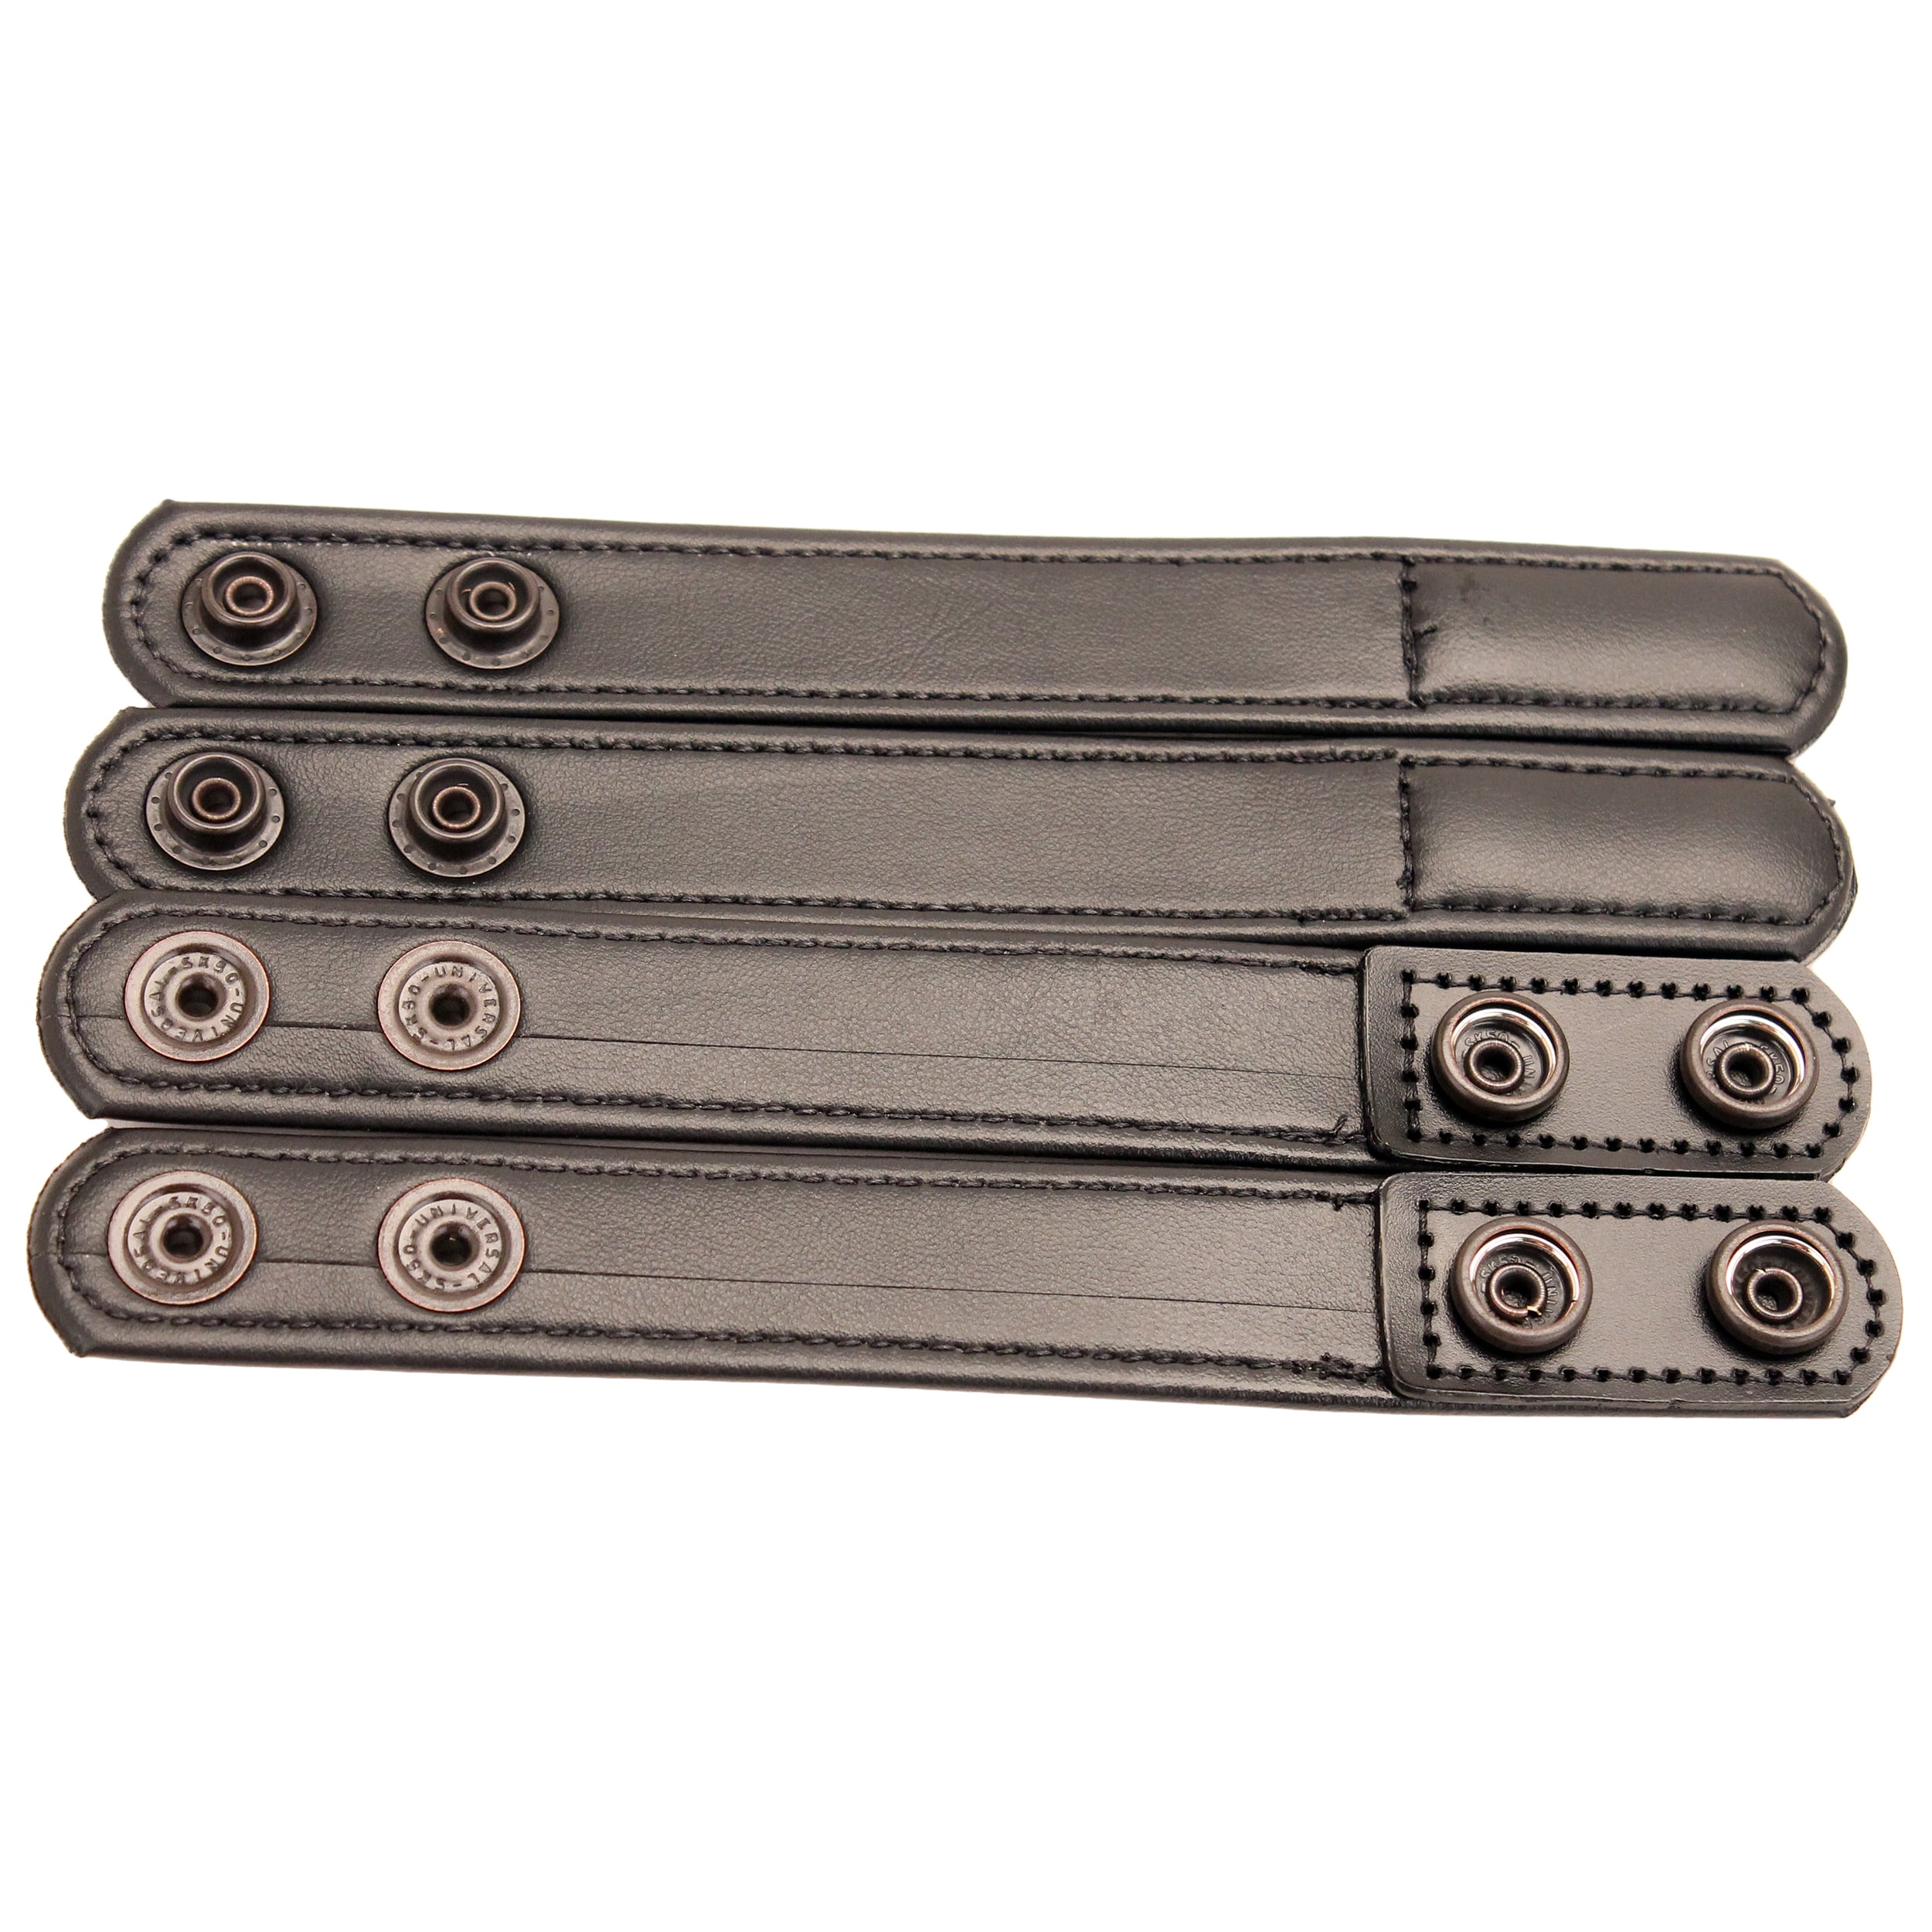 Bianchi 22186 AccuMold Elite Plain Leather Belt Keepers W Brass Snap 4 Pack for sale online 